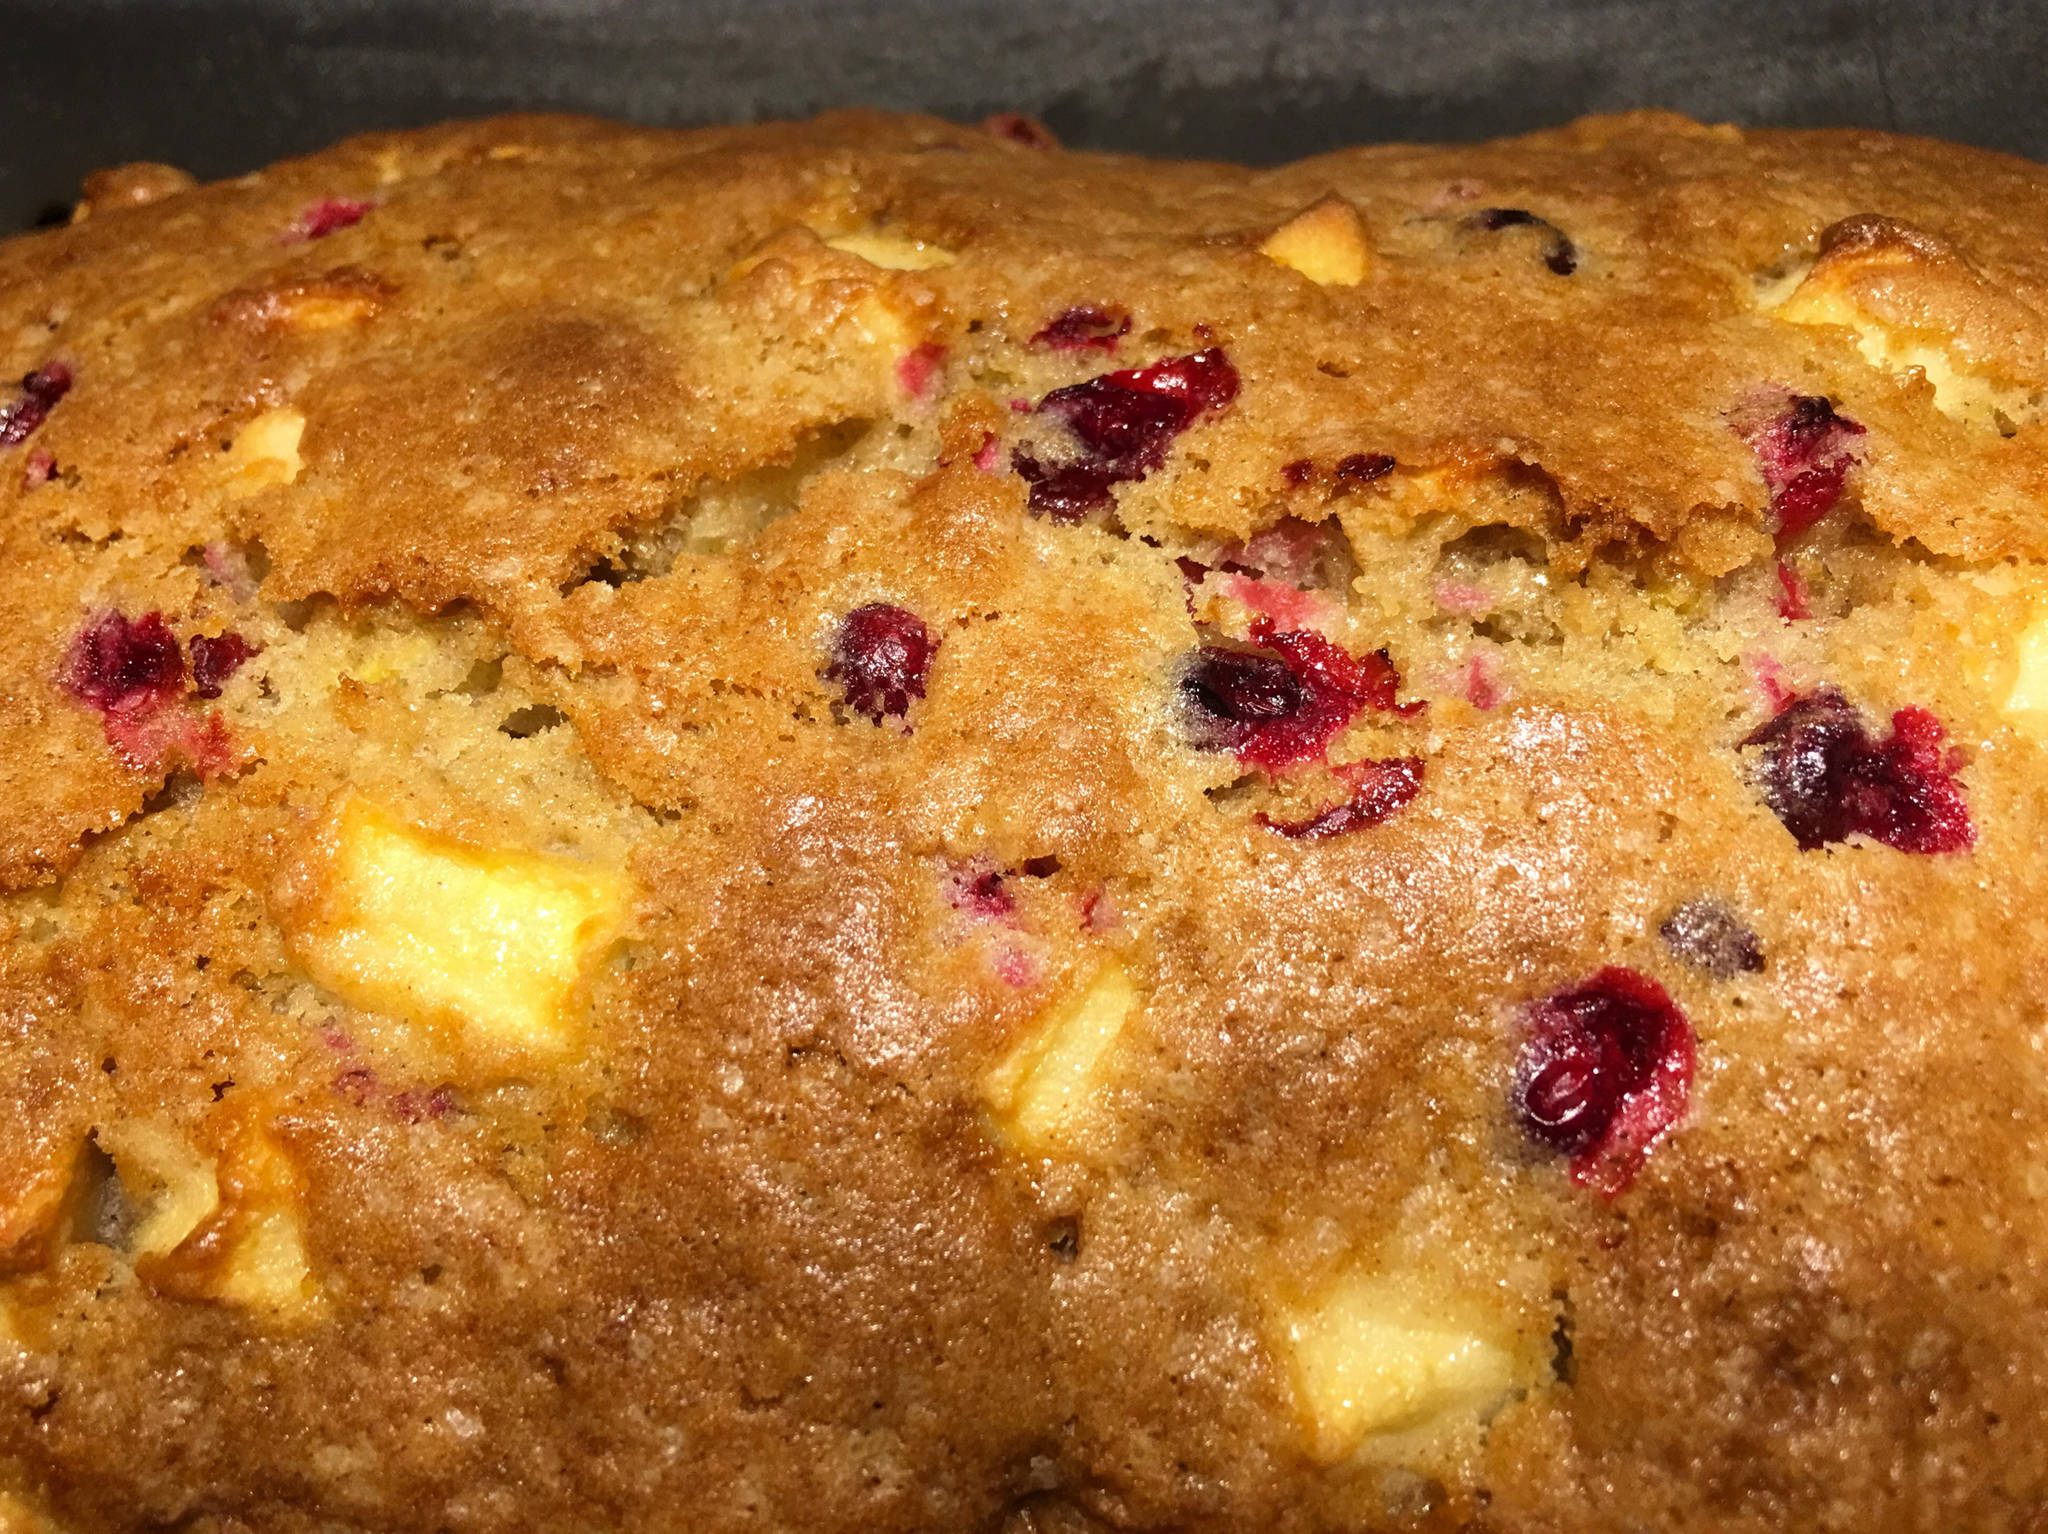 A finished loaf of cranberry-apple bread is seen in the kitchen of Erin Anais Heist on Oct. 14, 2018. (Erin Anais Heist | For the Juneau Empire)